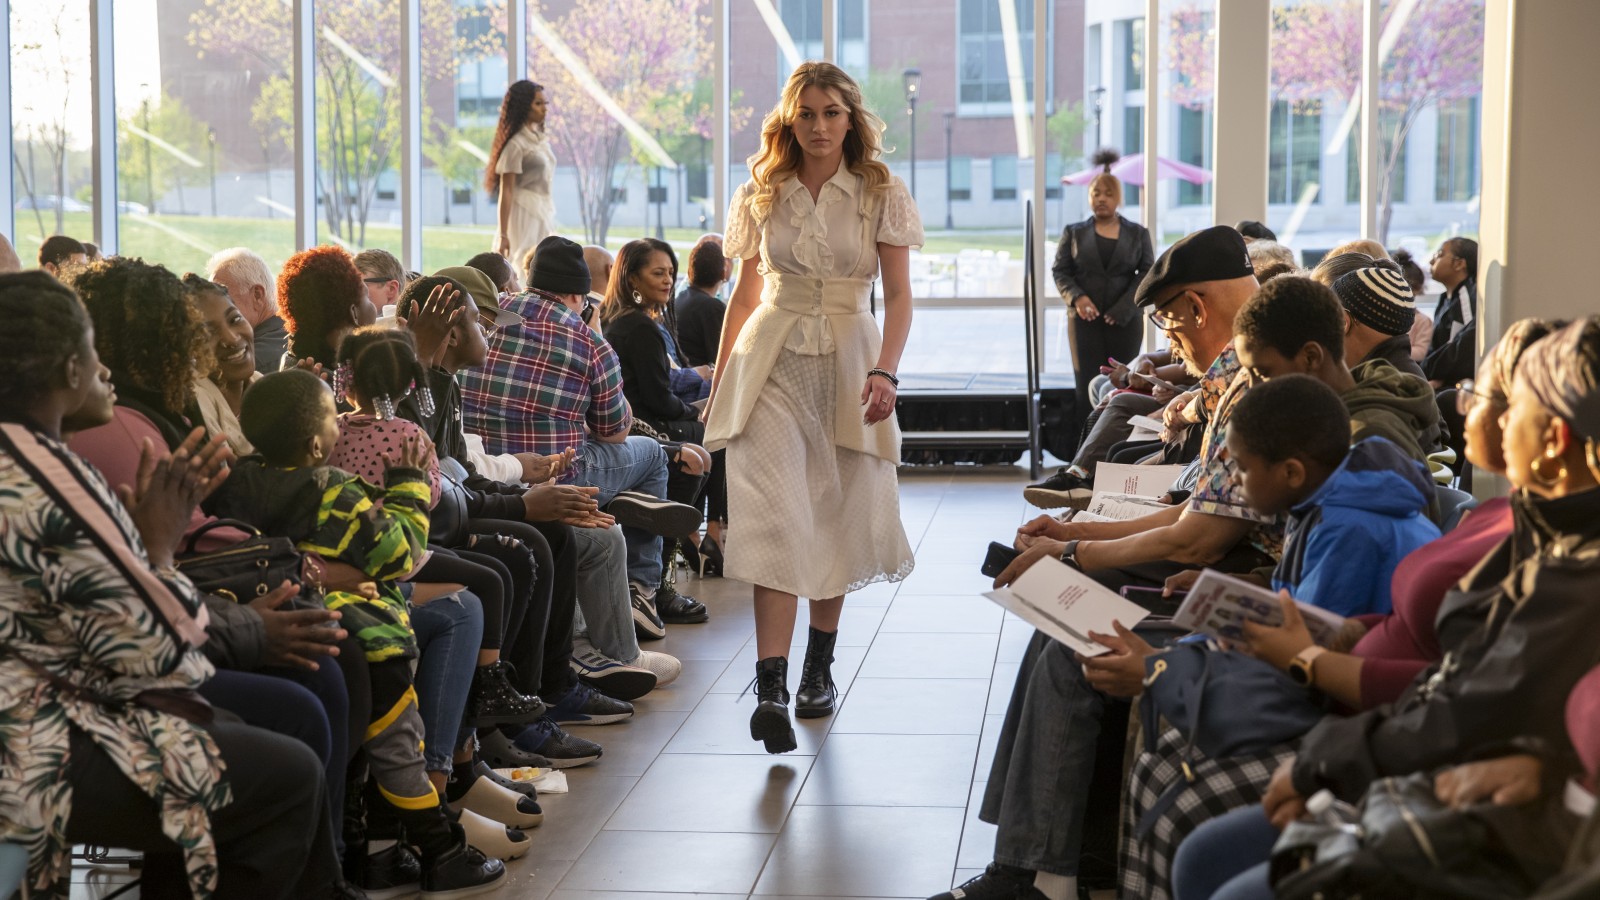 A student wearing white garment and black combat boots at the fashion show